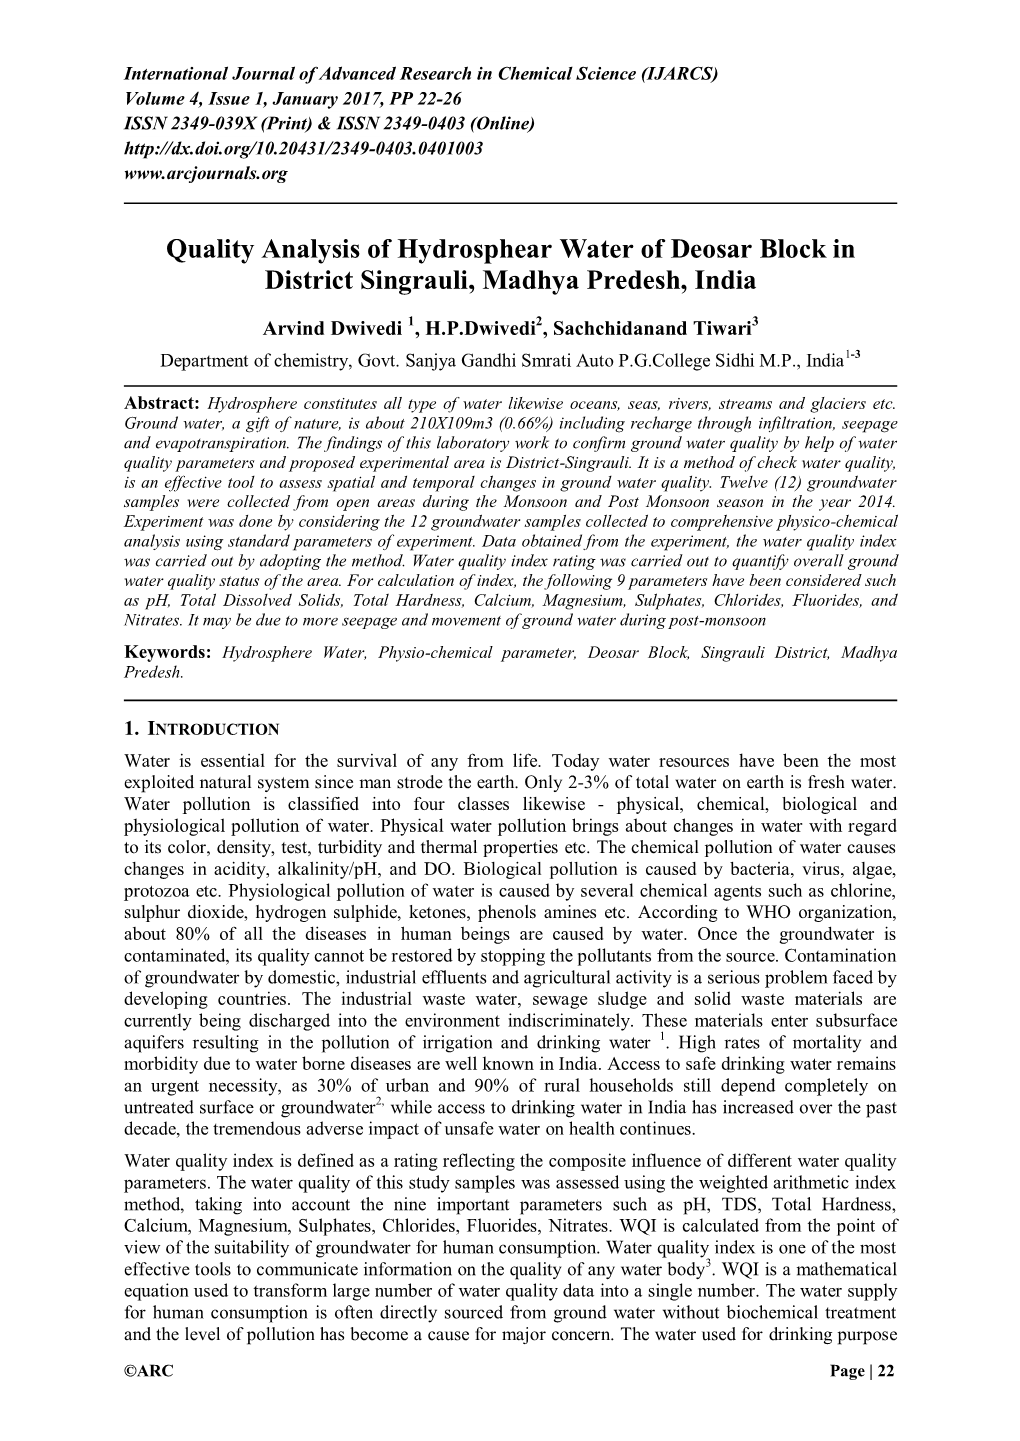 Quality Analysis of Hydrosphear Water of Deosar Block in District Singrauli, Madhya Predesh, India